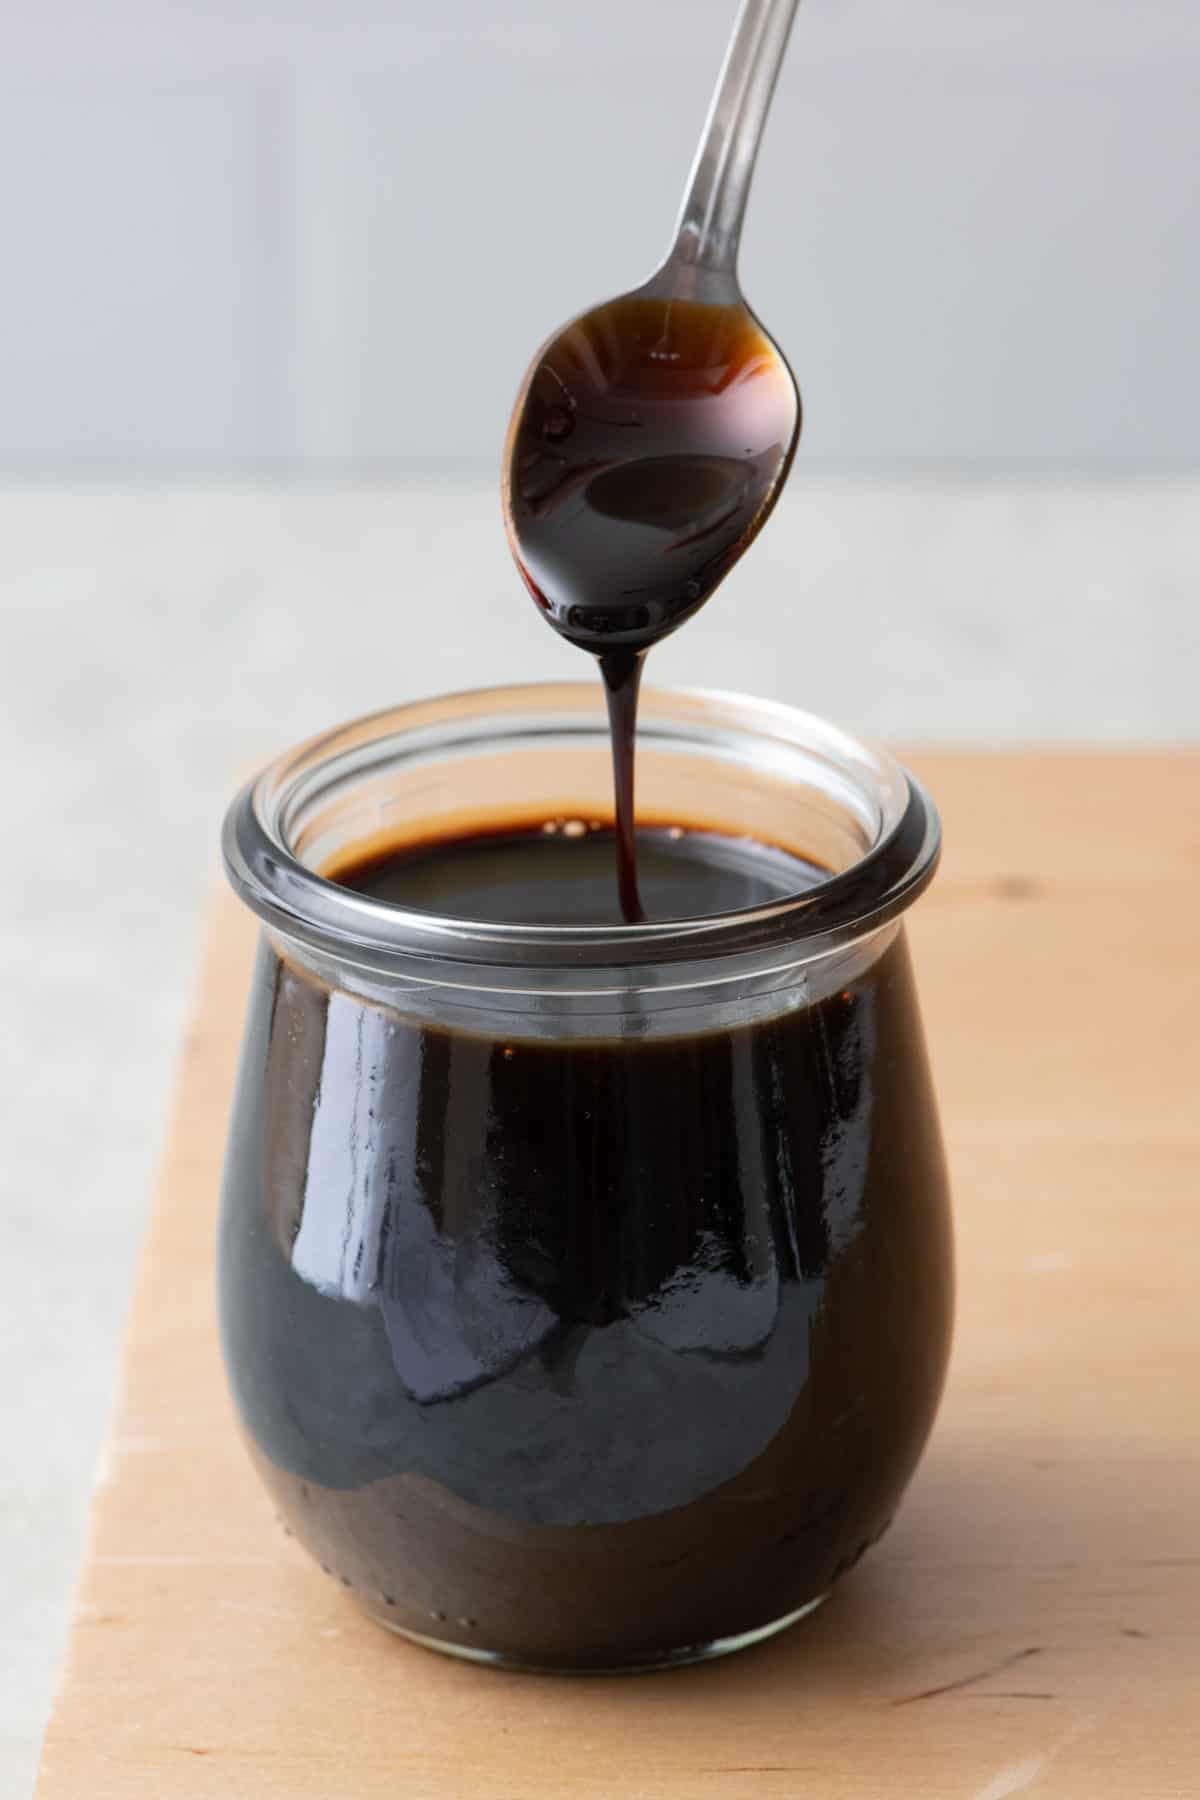 Balsamic glaze in a small glass jar with a spoon lifting some up and drizzling back into the jar.